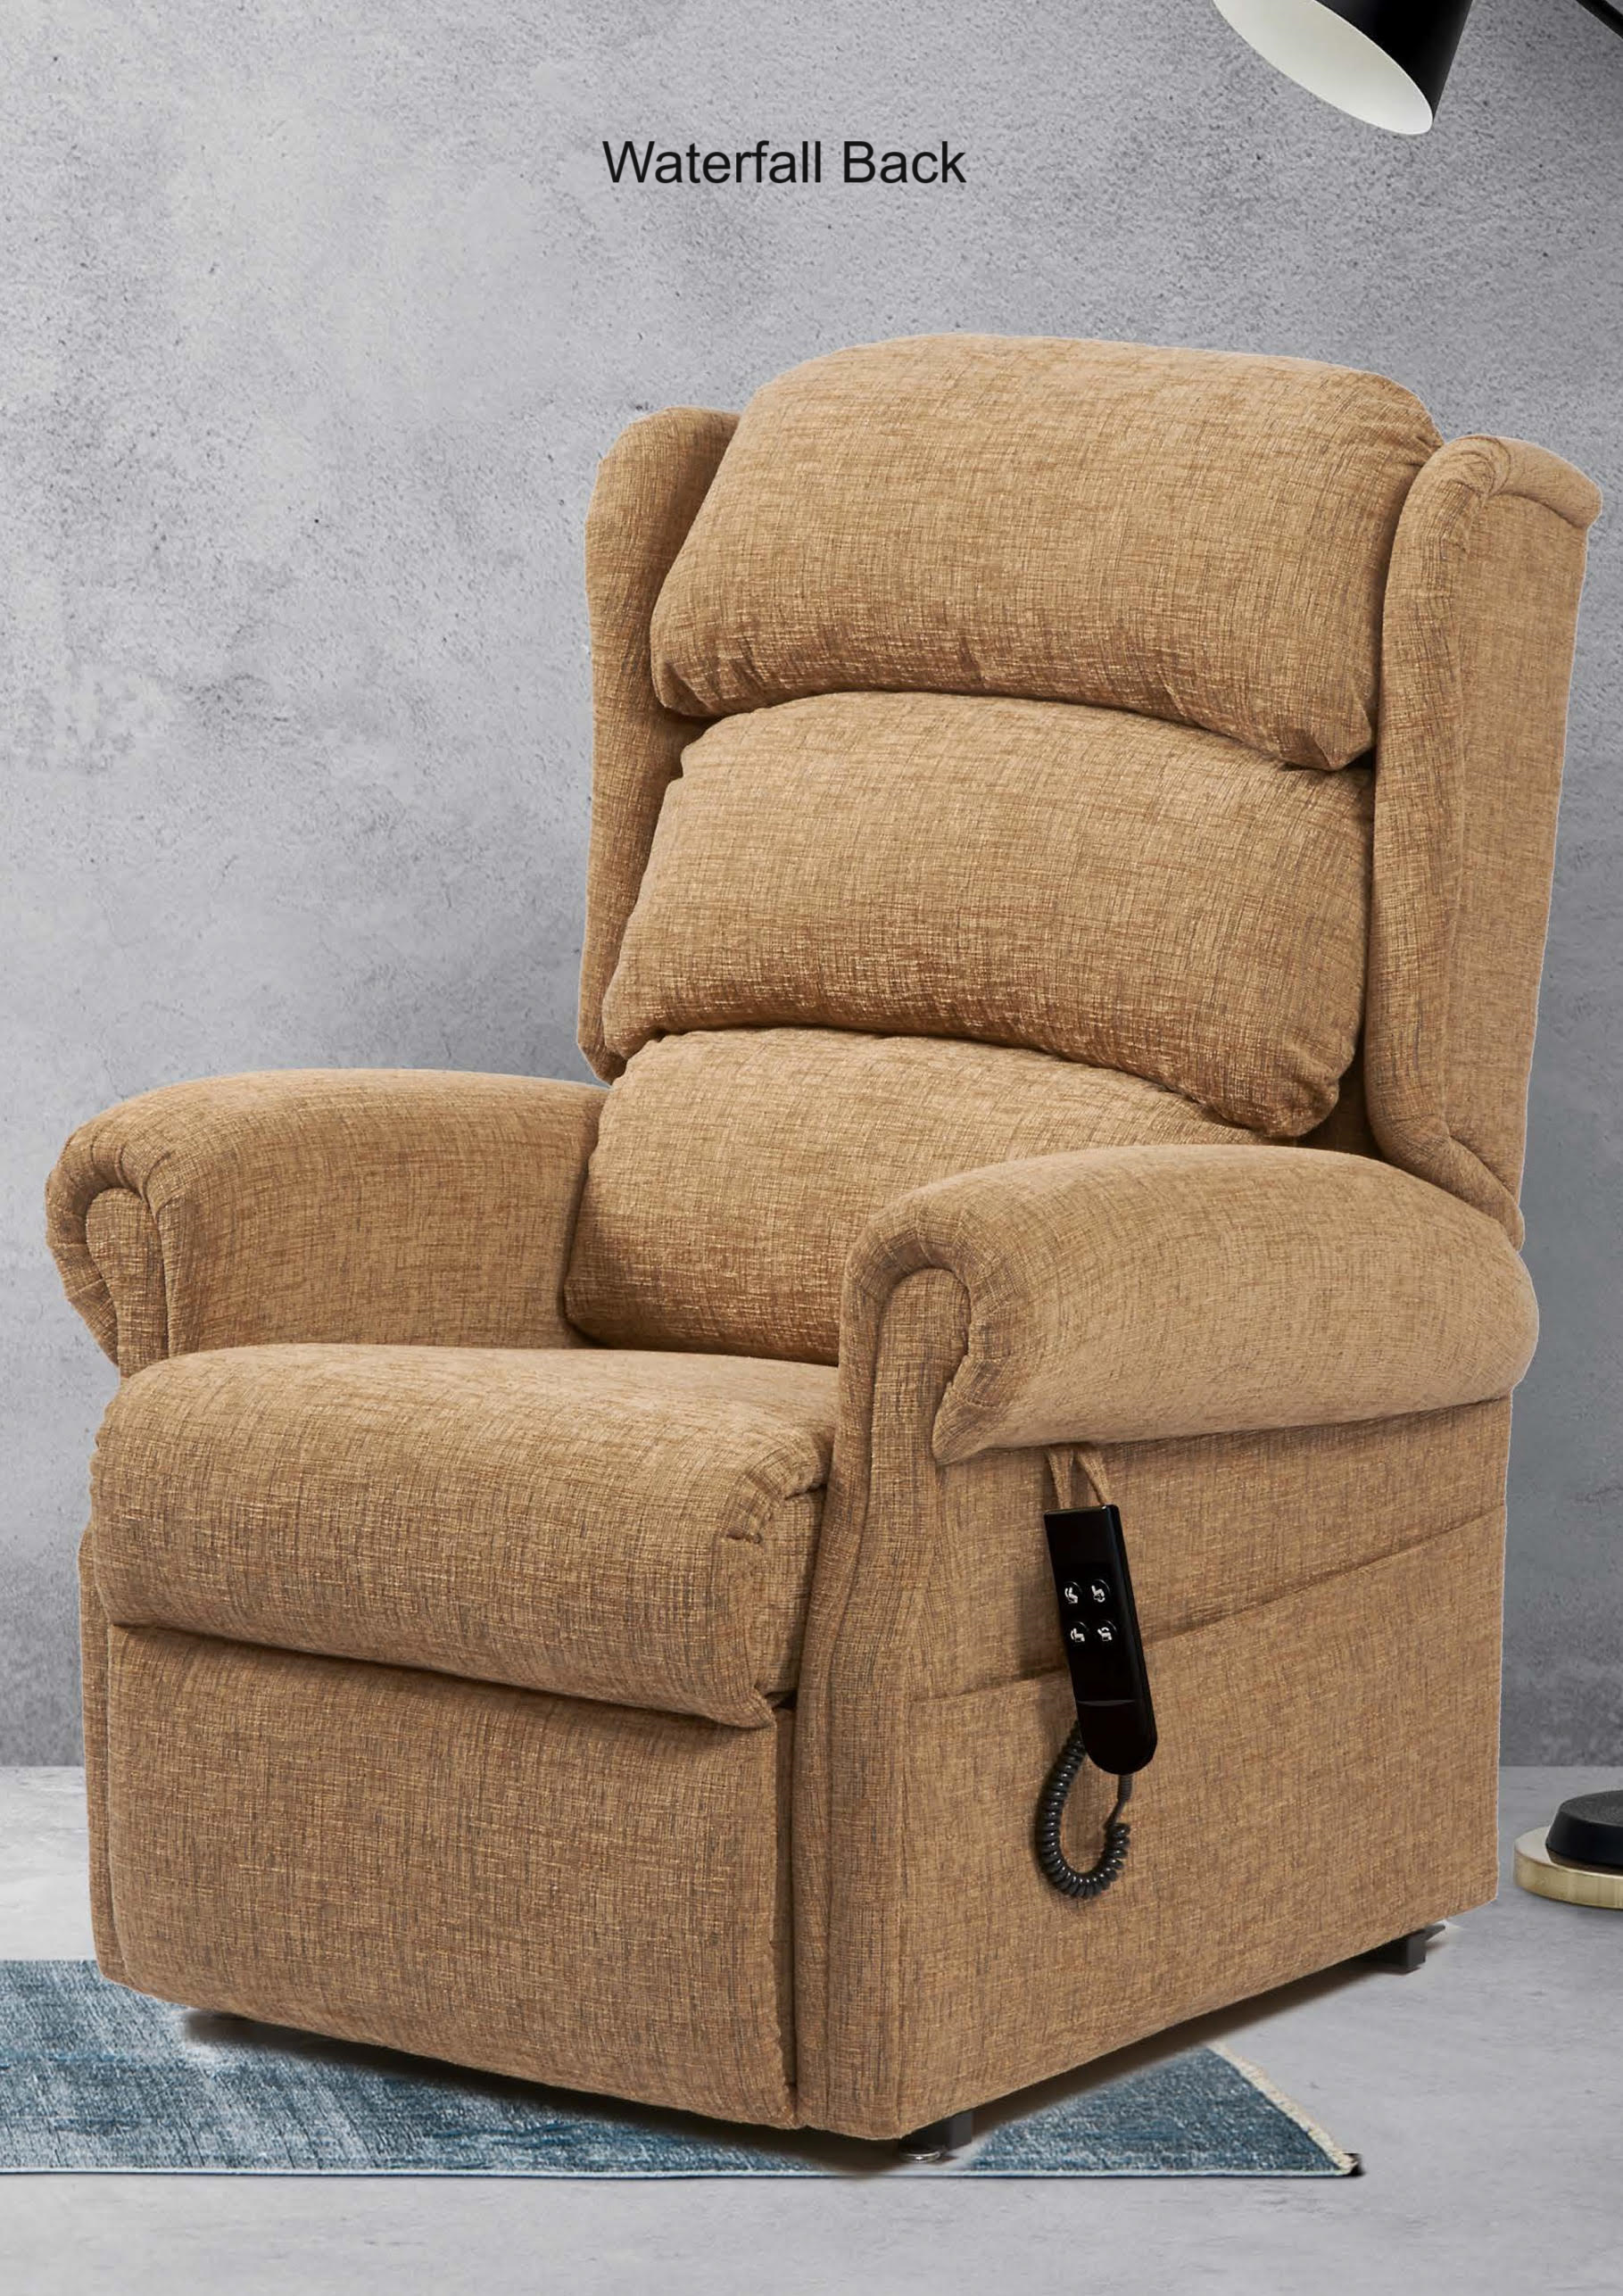 Primacare Brecon Dual Motor Tilt in Space Riser Recline Chair with Waterfall Back